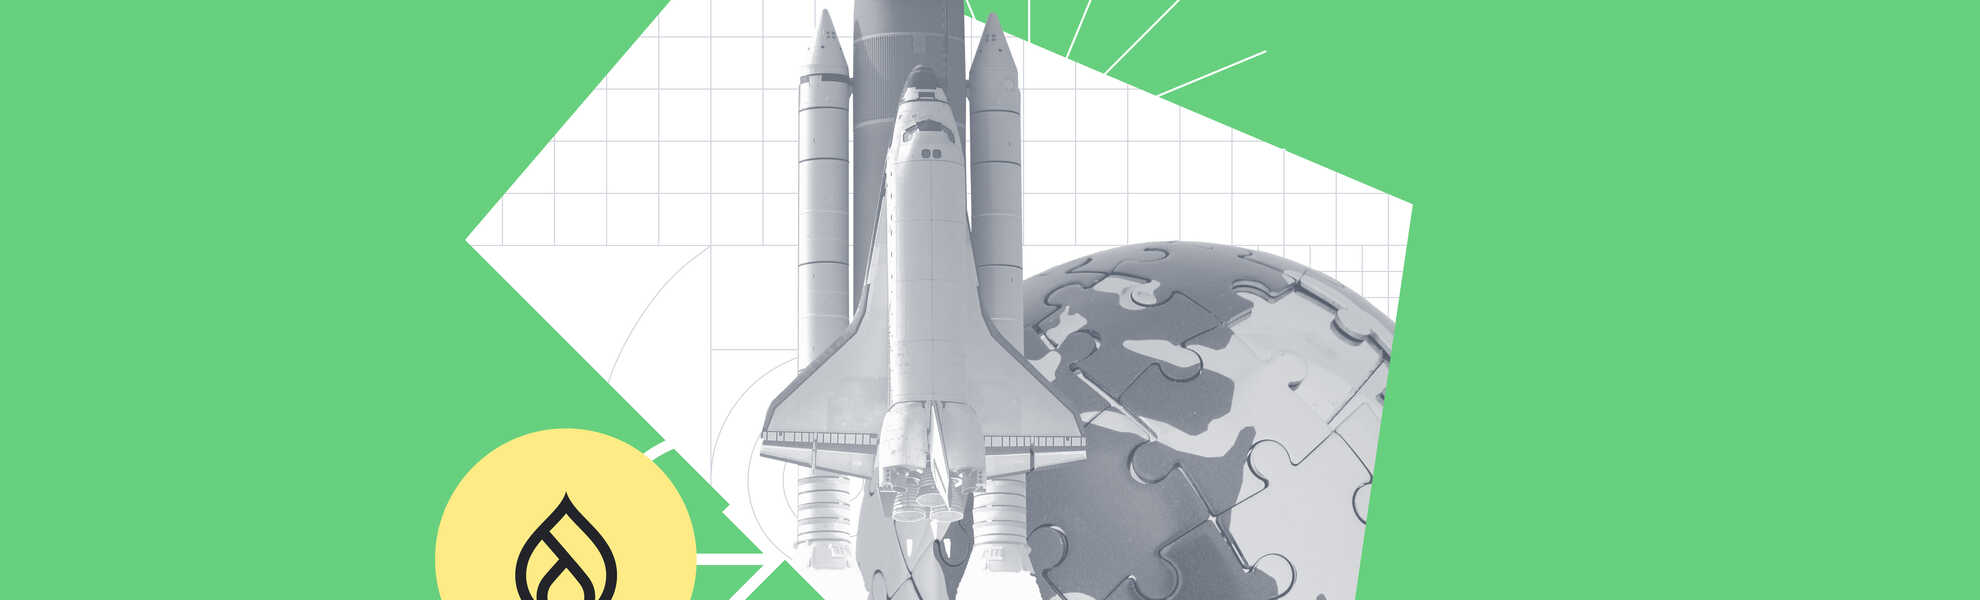 A rocket ship on a green background with the Drupal logo